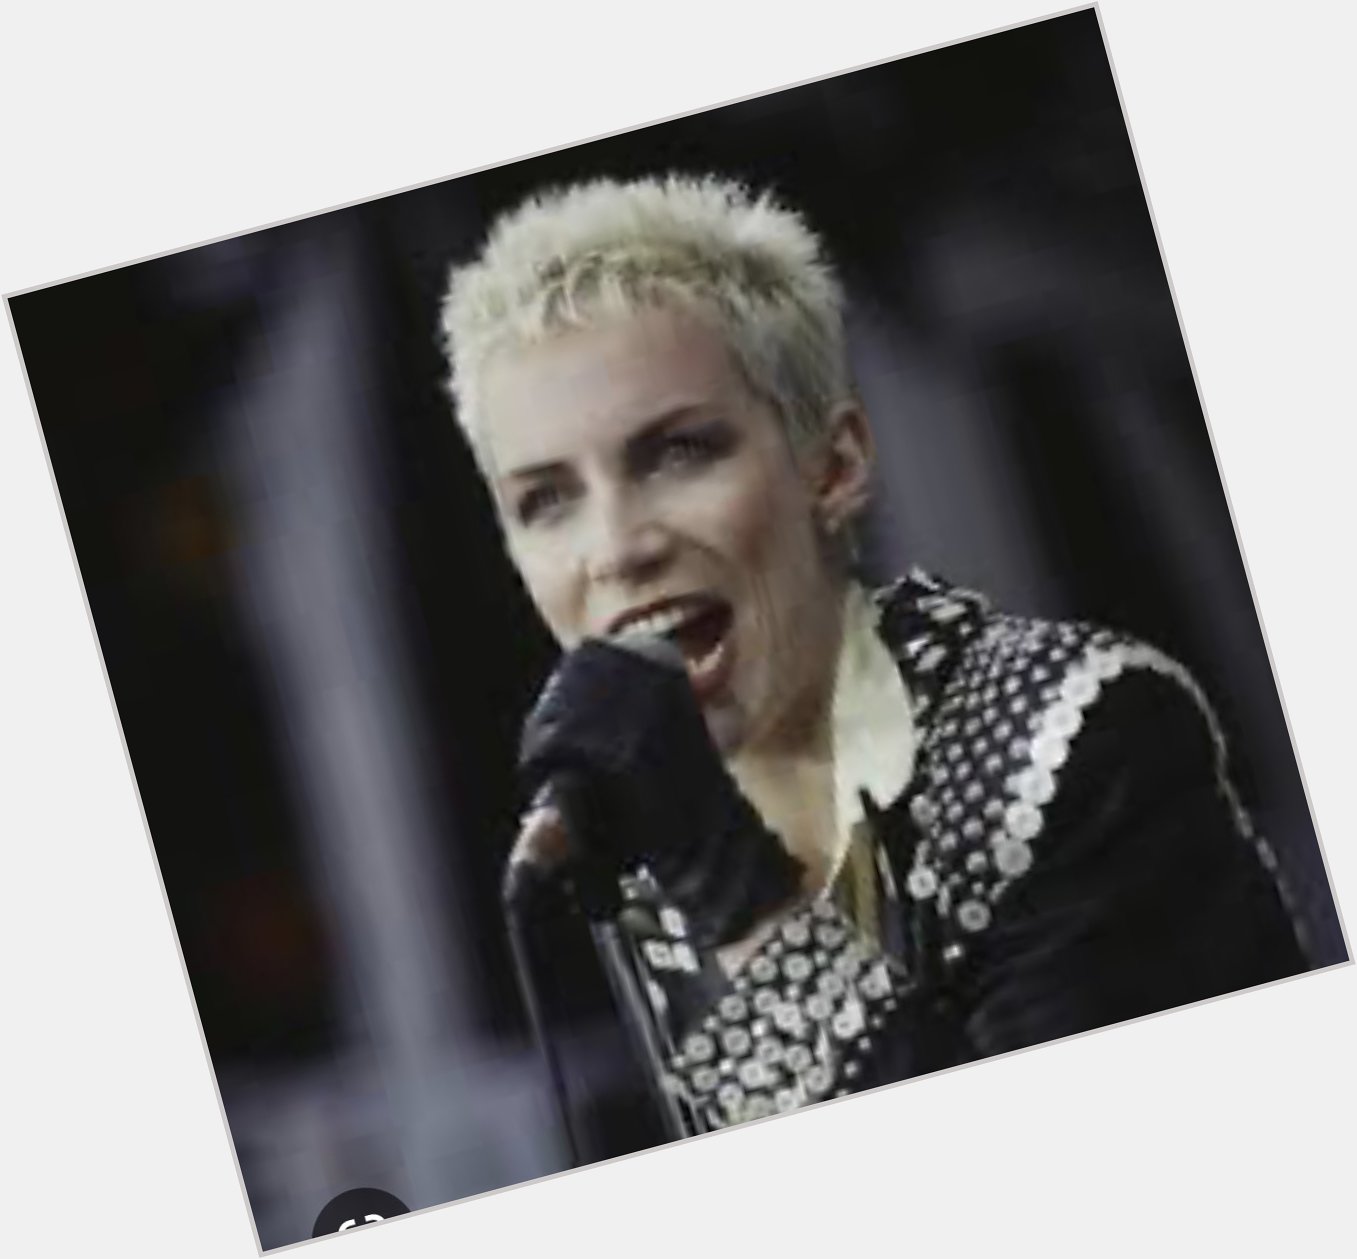 Happy Birthday   to Annie Lennox / Eurithmics. Greetings from Paraguay  . 